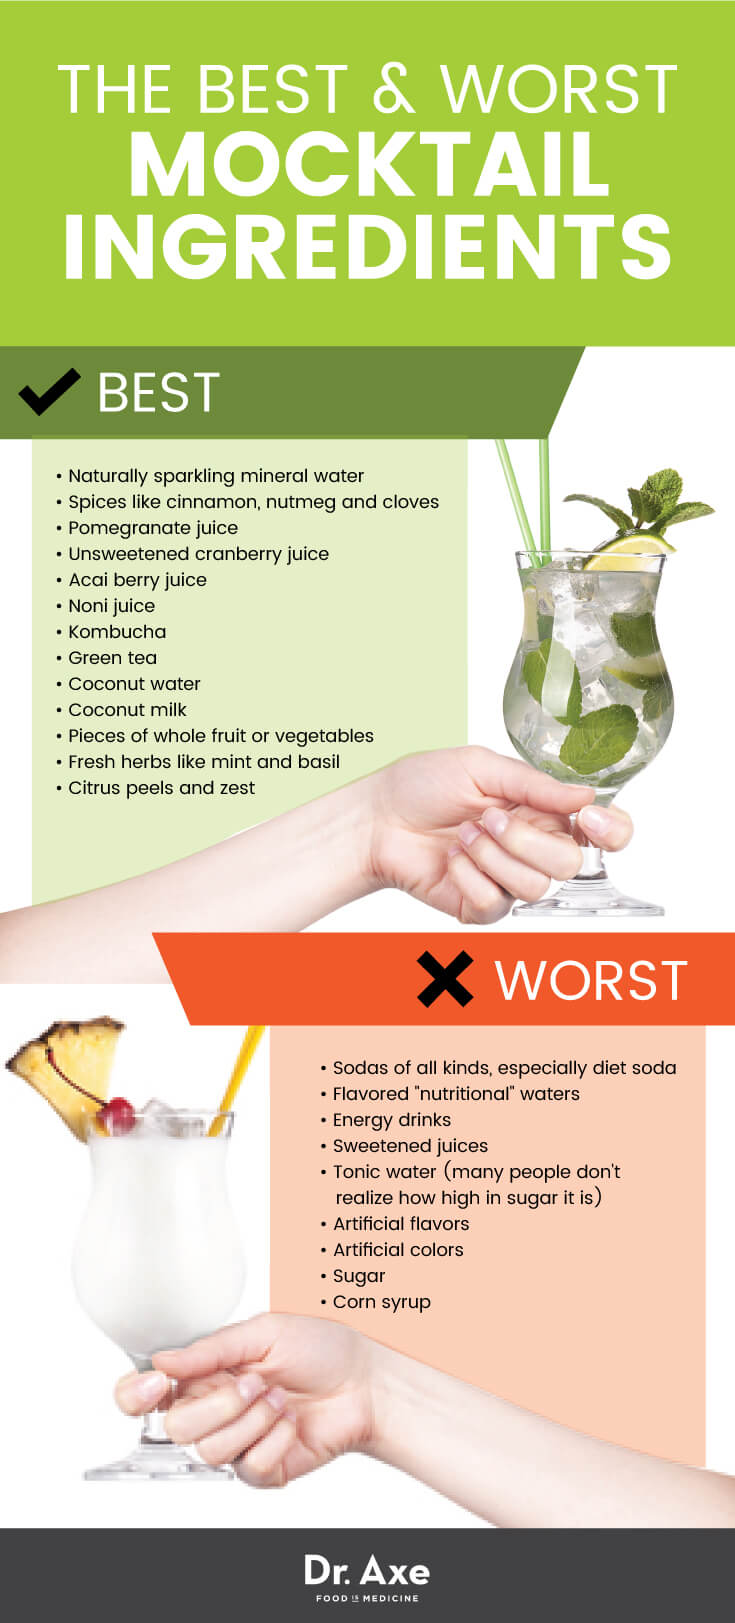 Best and worst mocktail ingredients - Dr. Axe